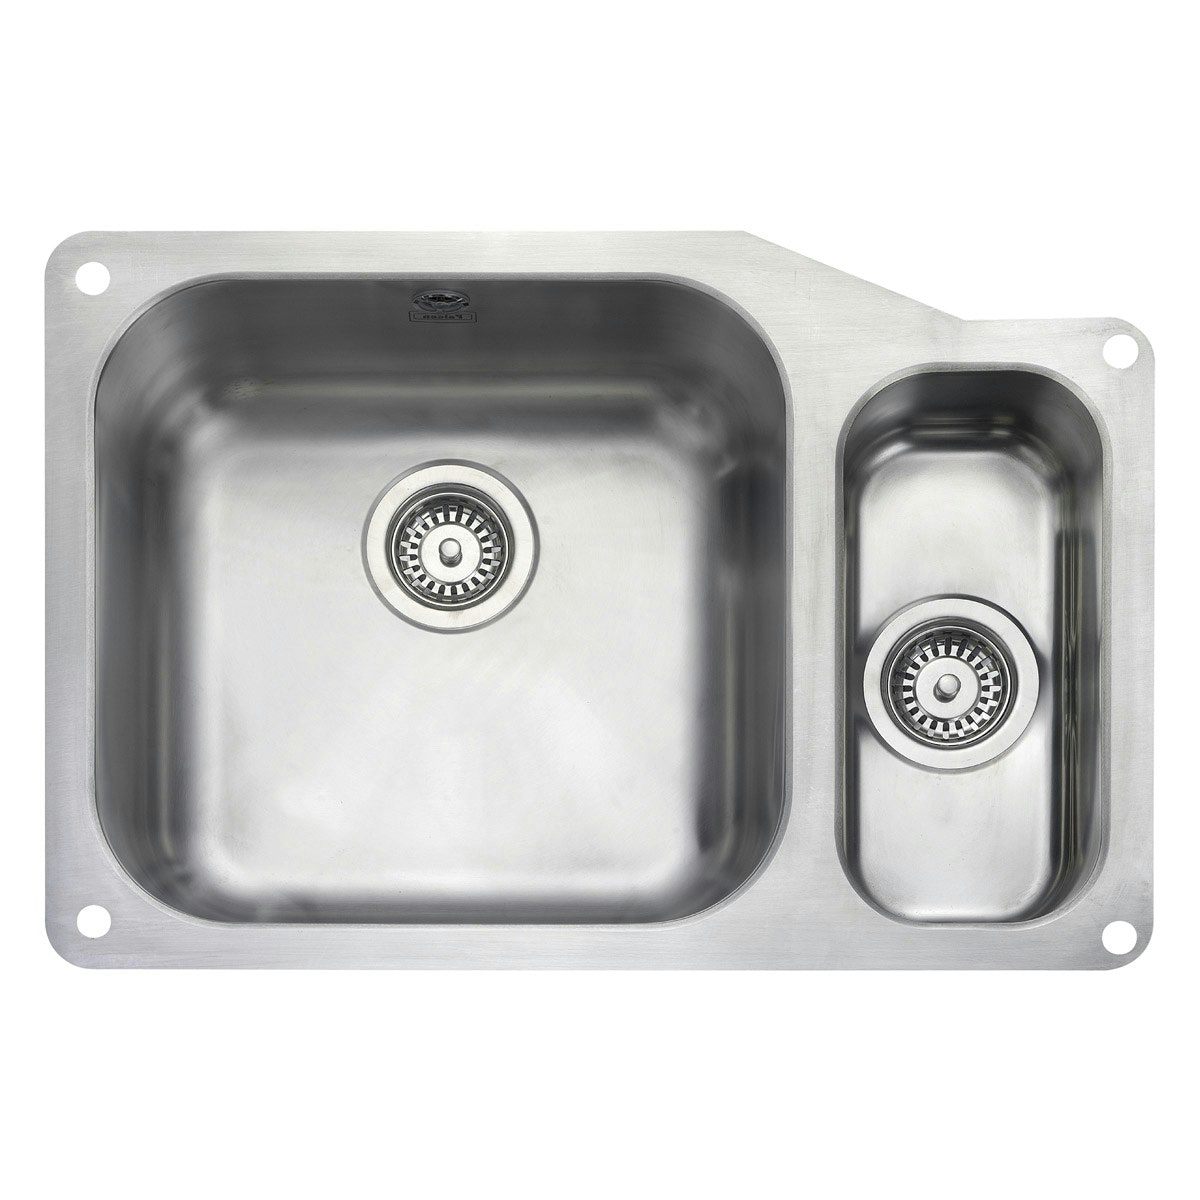 Rangemaster Atlantic Classic 1.5 bowl undermount right handed kitchen sink with waste